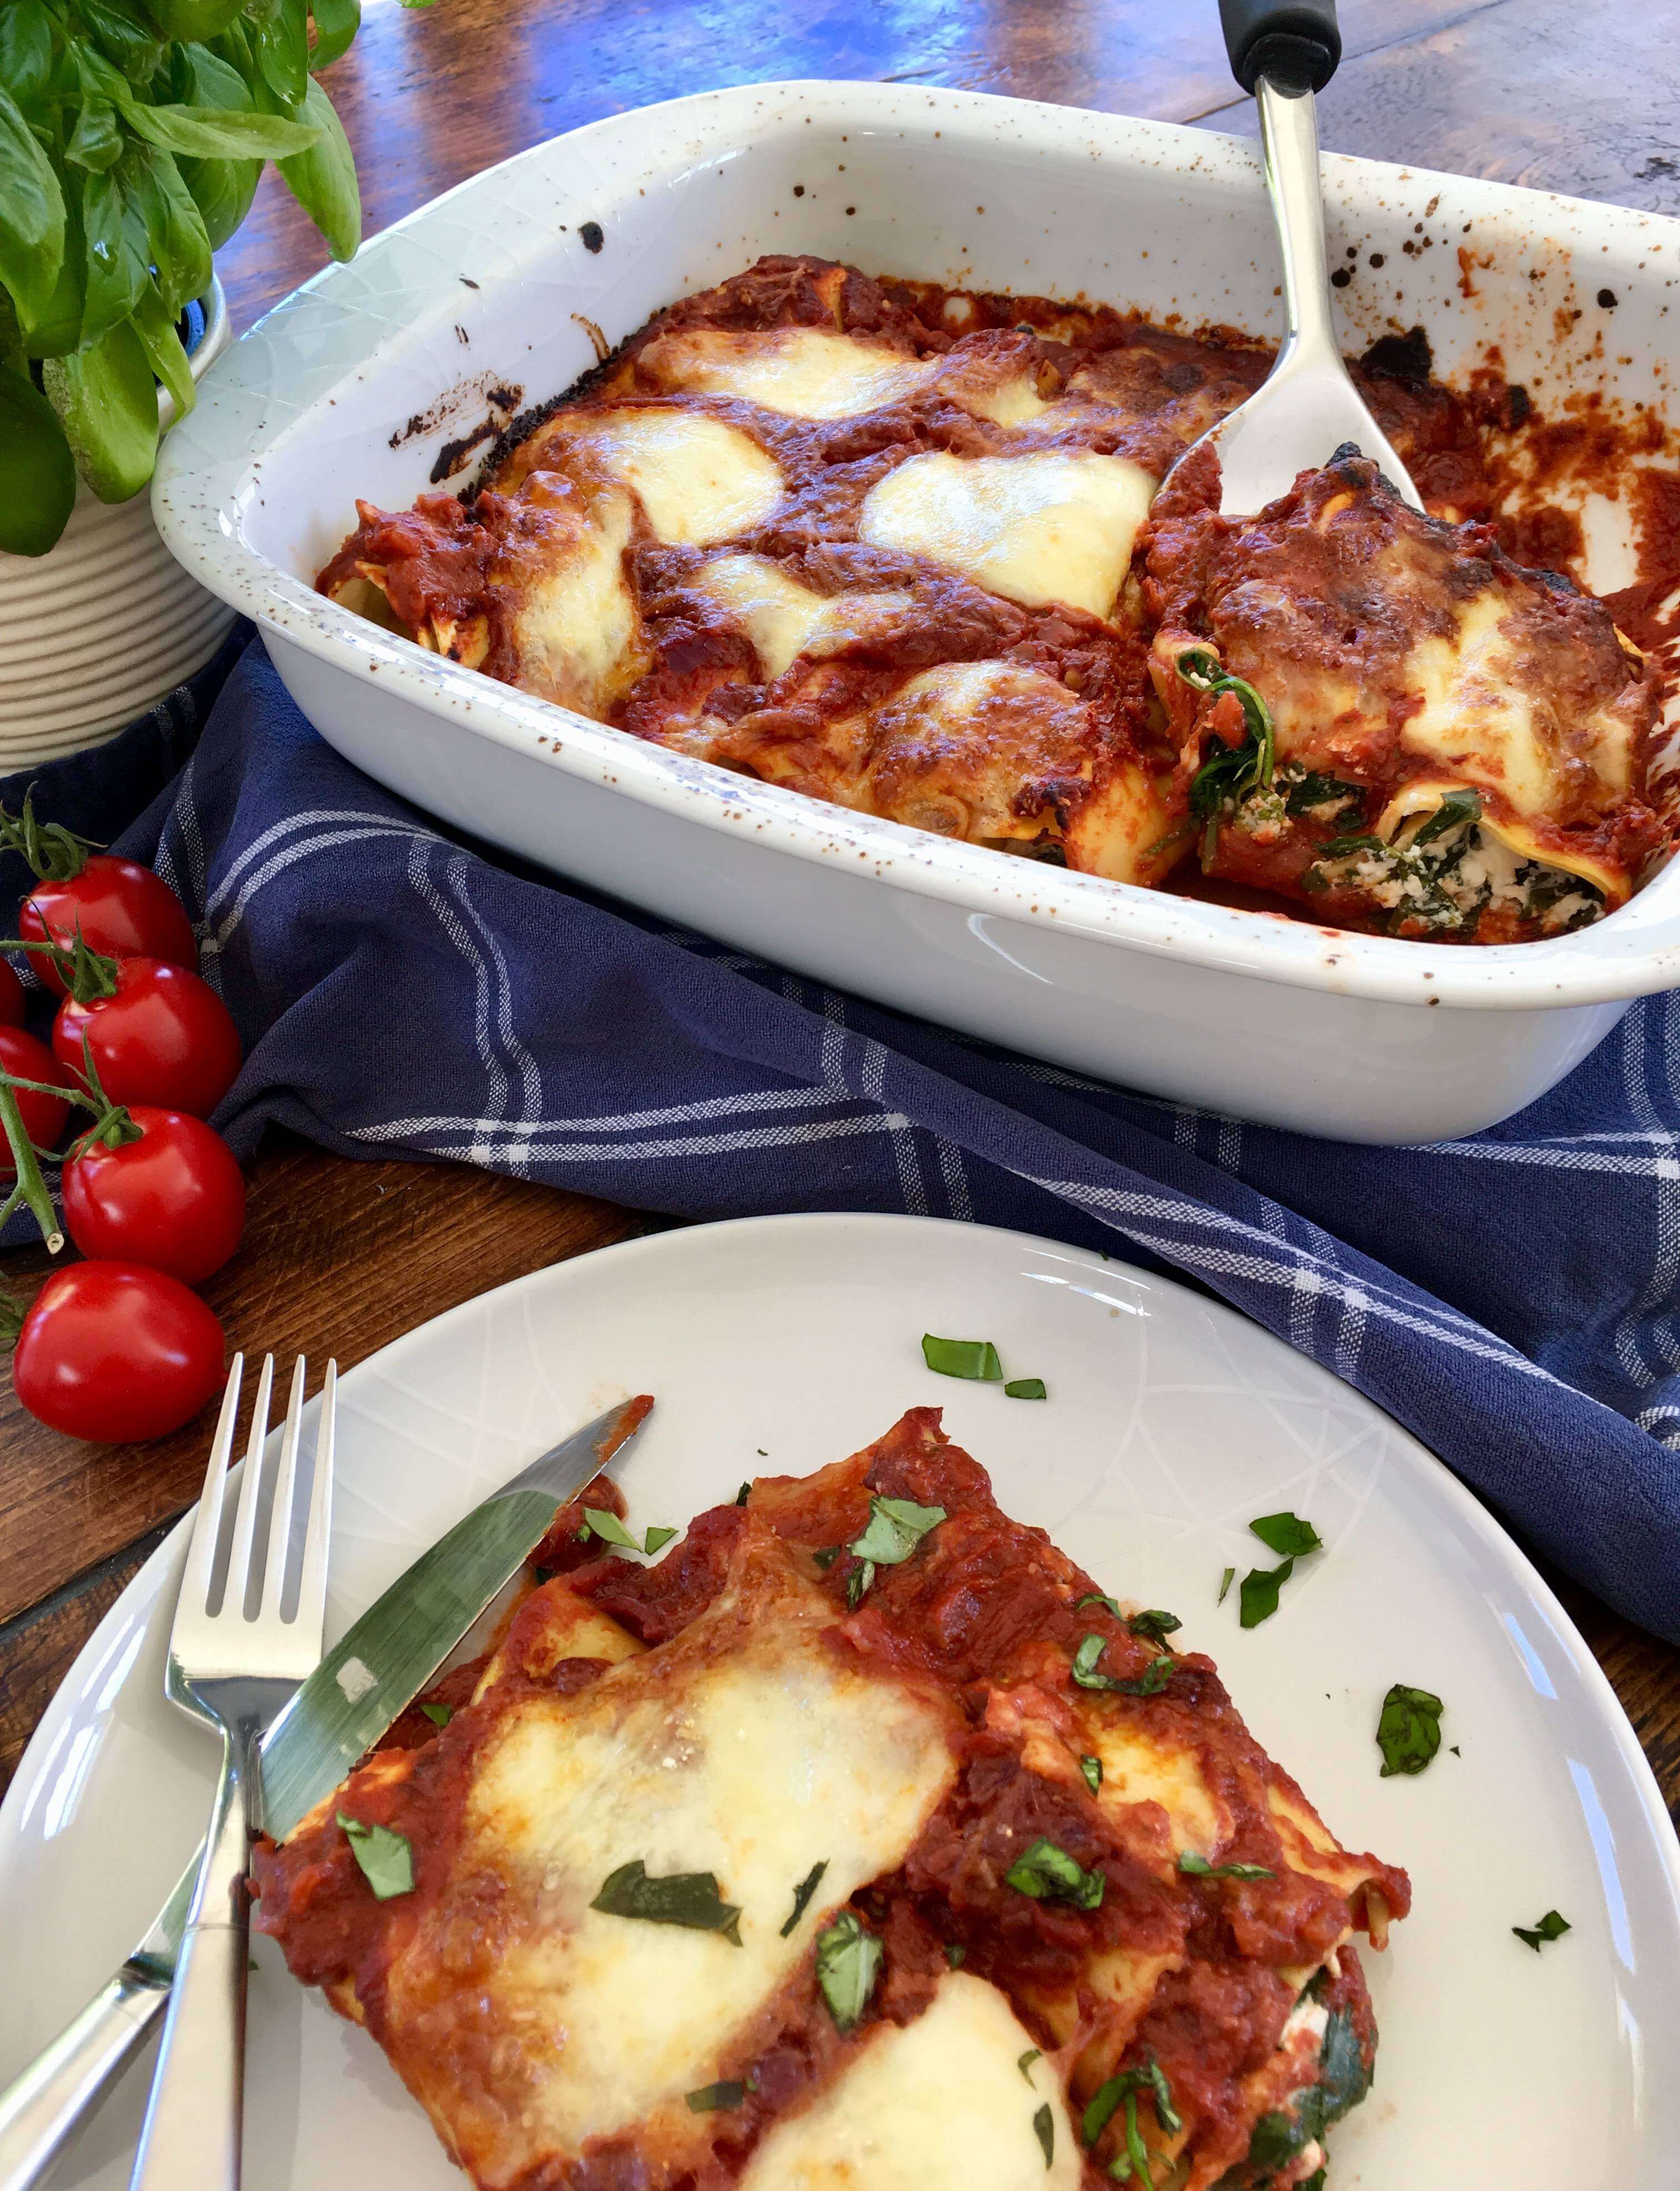 A Simple Cannelloni Recipe Stuffed With Spinach And Ricotta